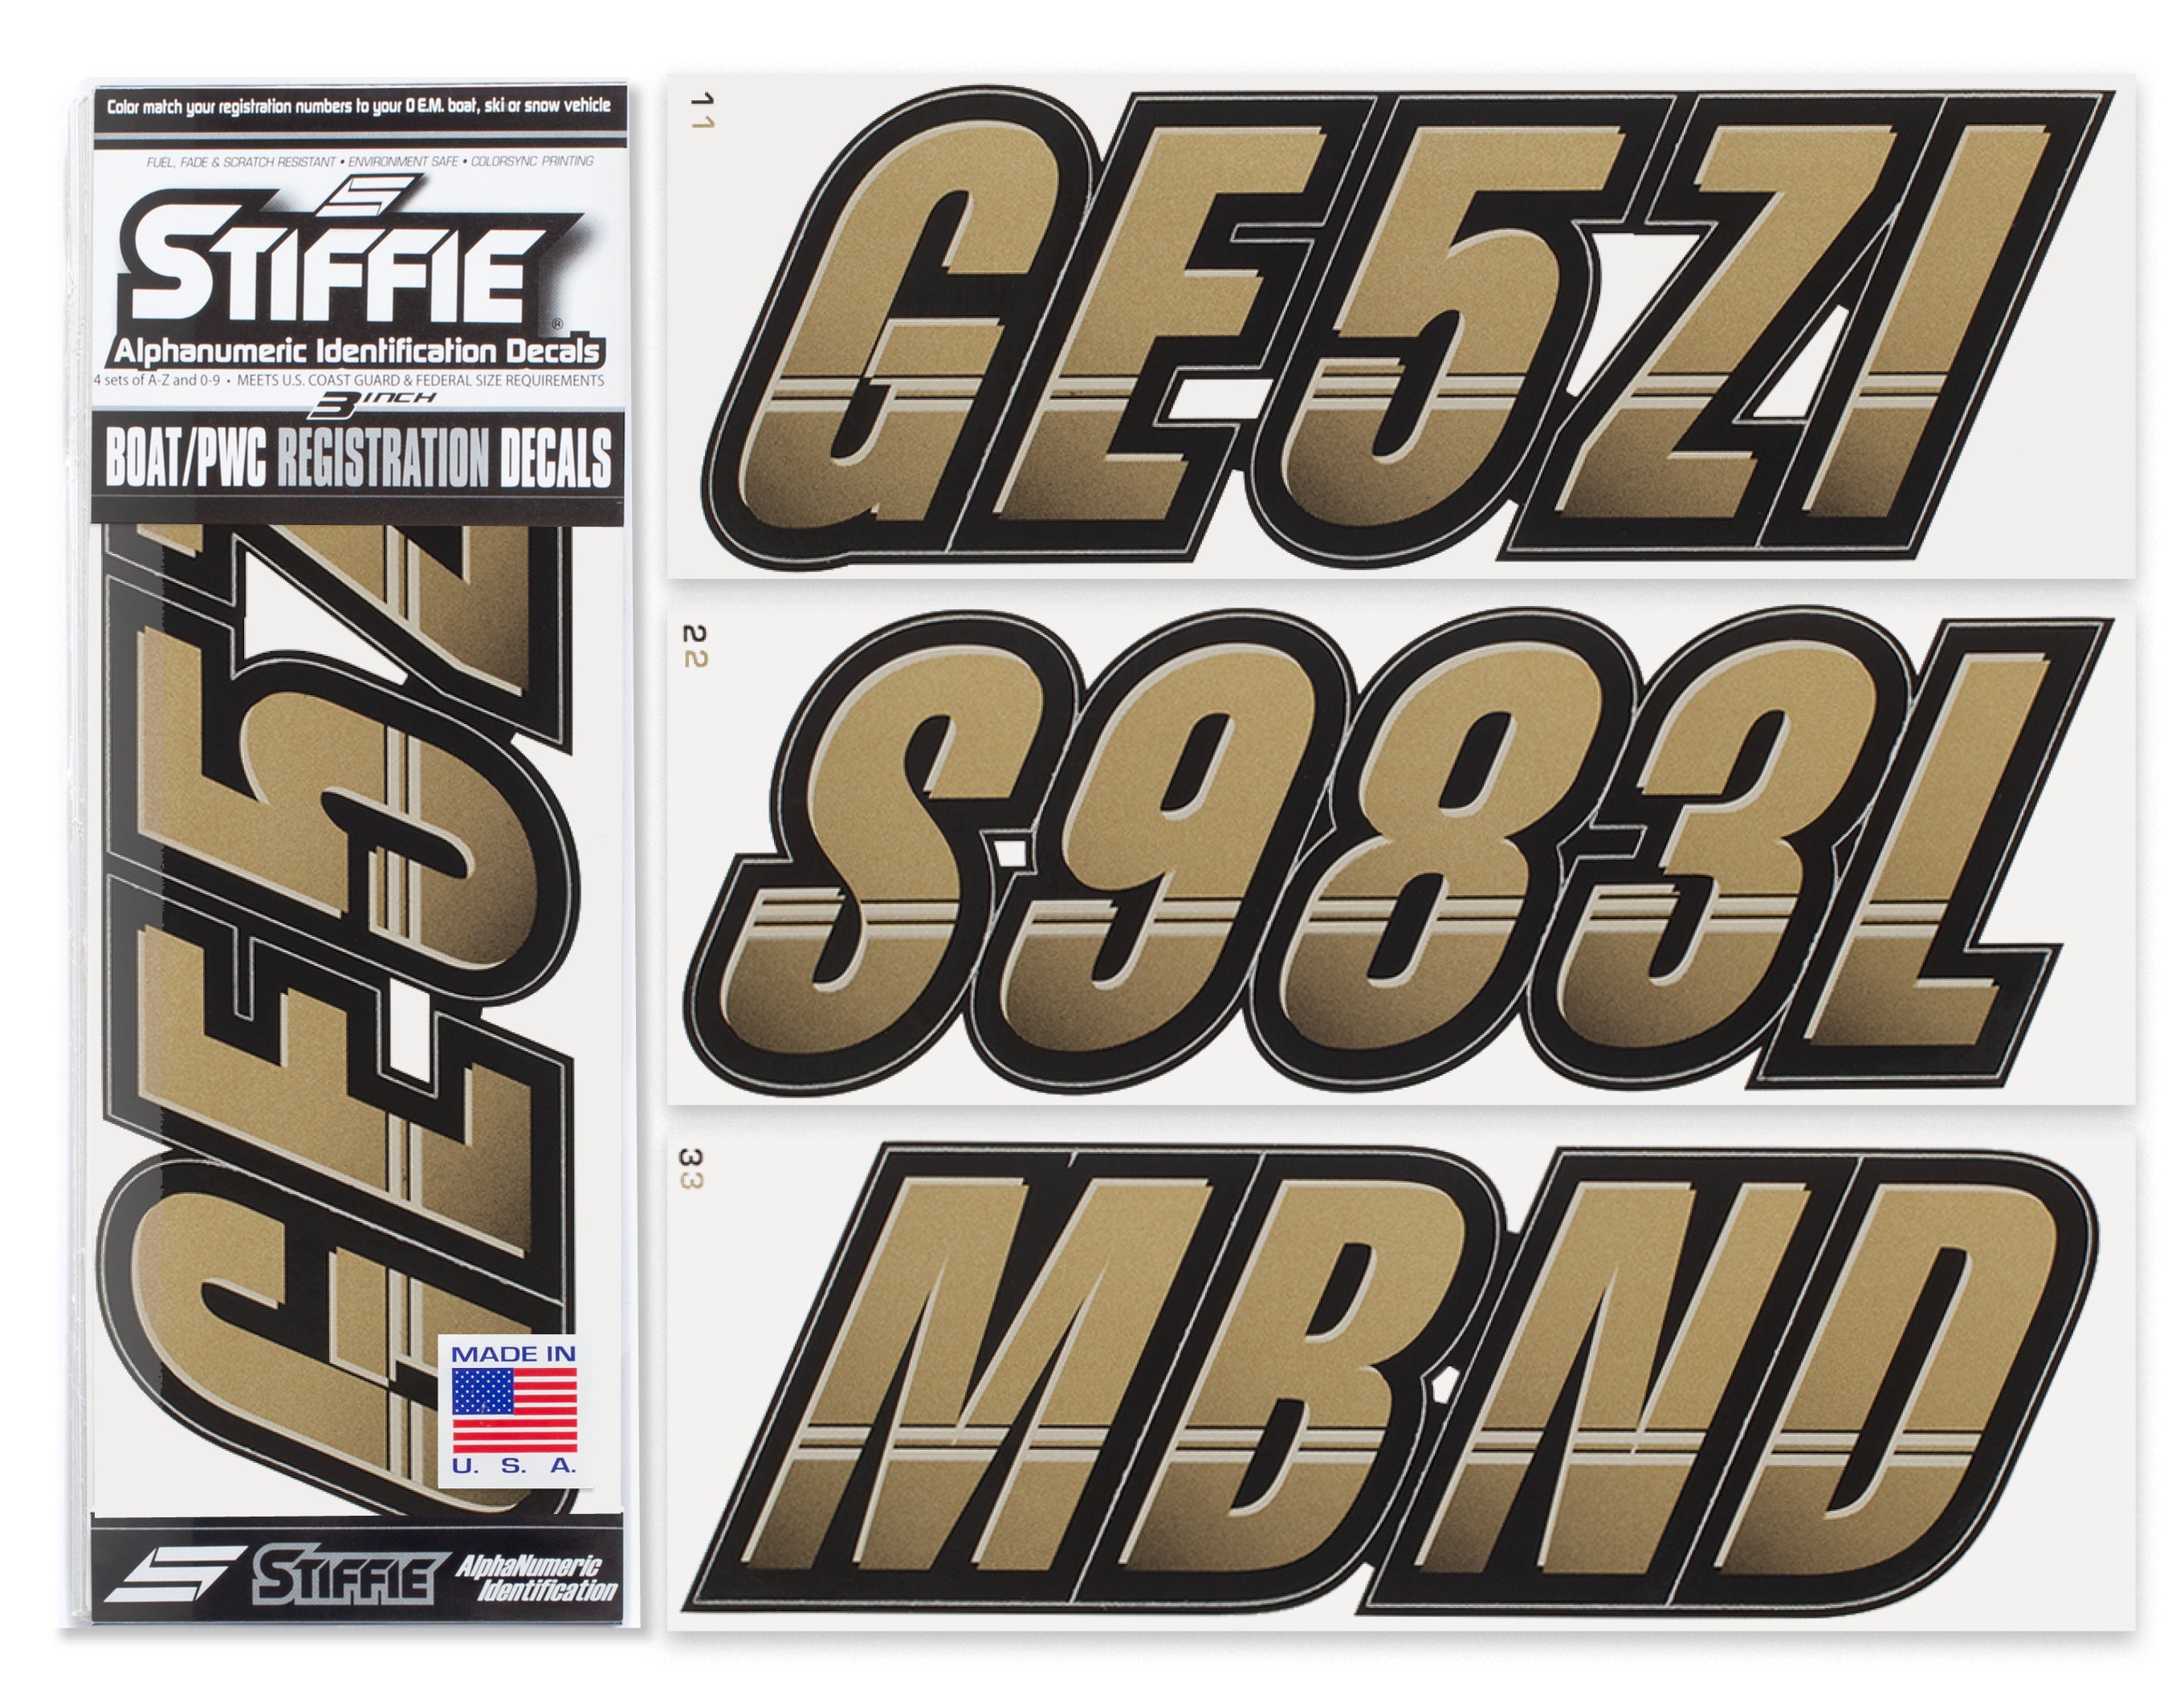 Stiffie Techtron Metallic Gold/Black 3" Alpha-Numeric Registration Identification Numbers Stickers Decals for Boats & Personal Watercraft